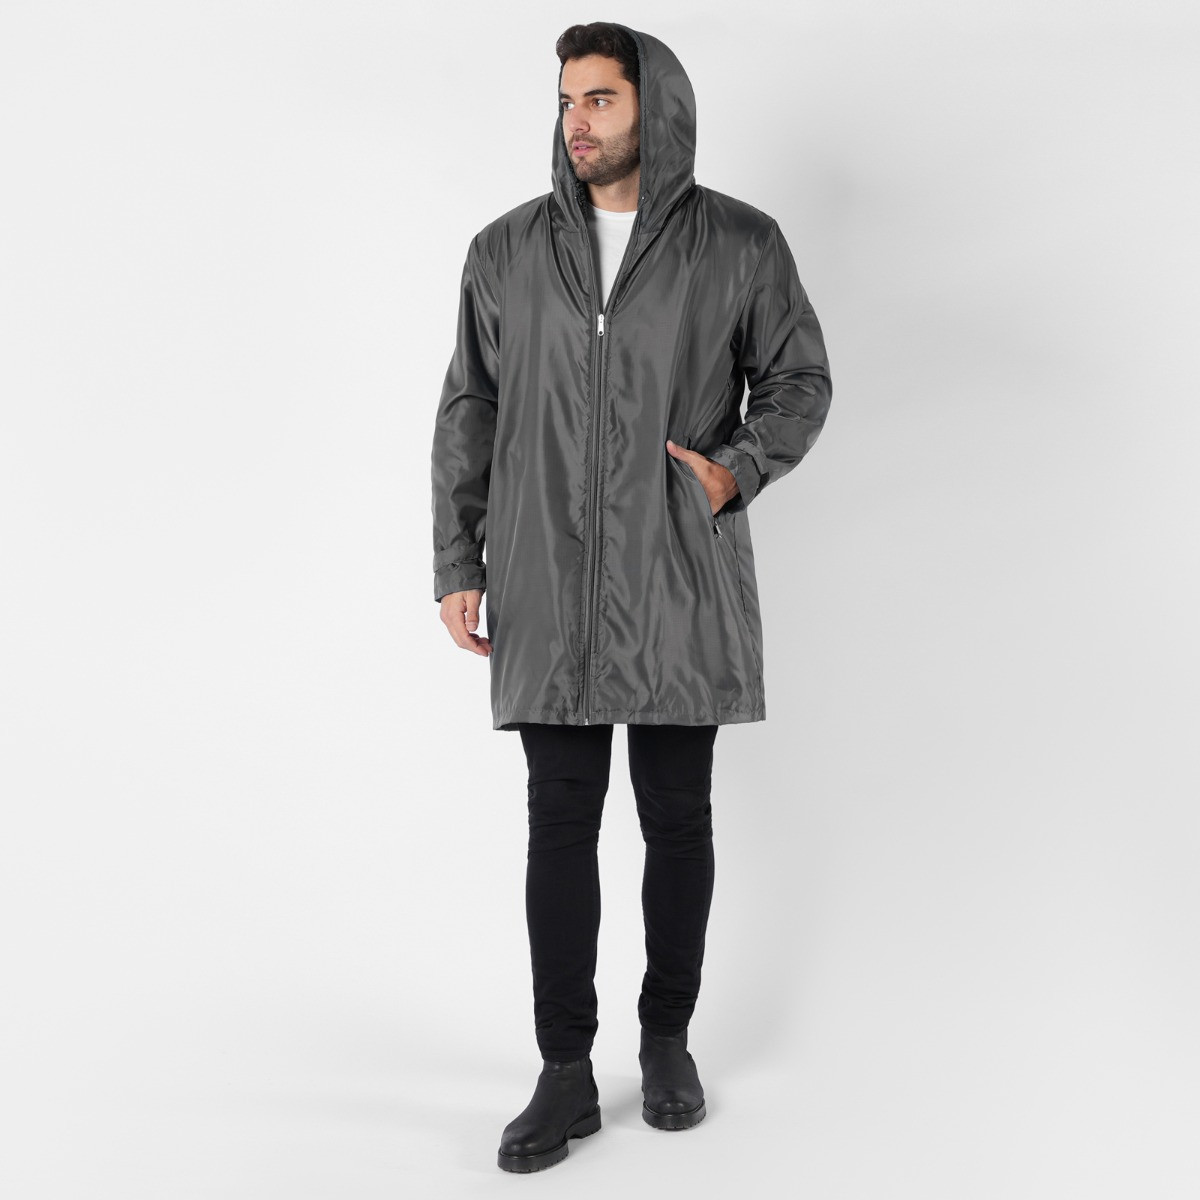 OHS Water Resistant Full Zip Changing Robe - Charcoal>